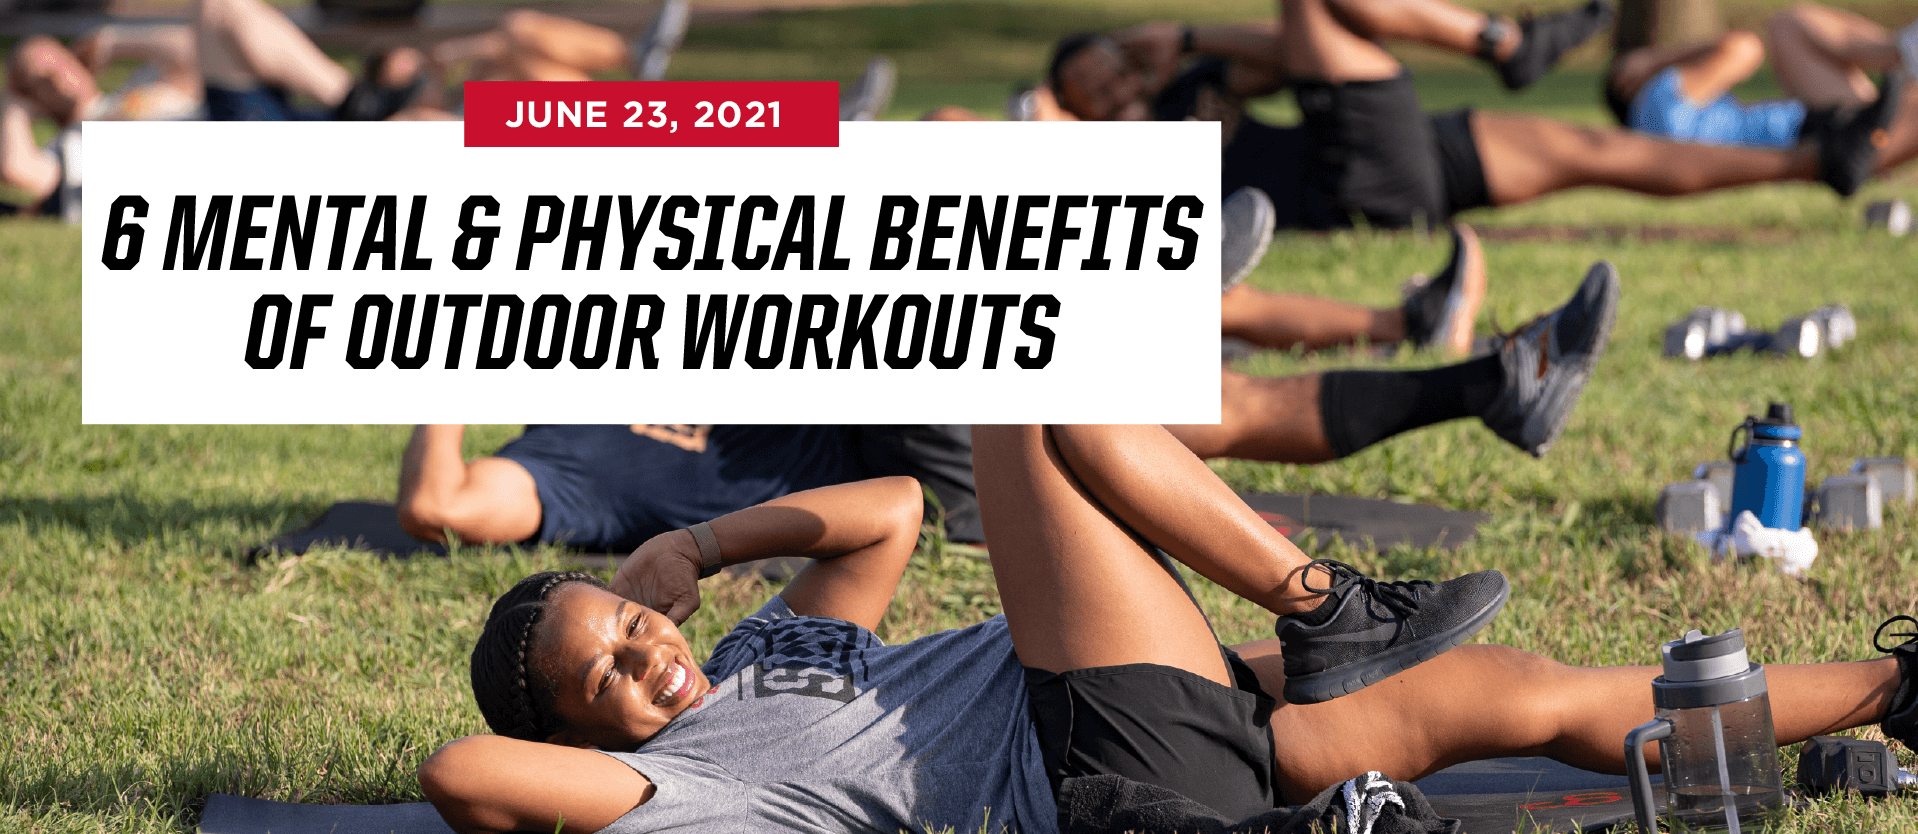 6 Mental & Physical Benefits of Outdoor Workouts